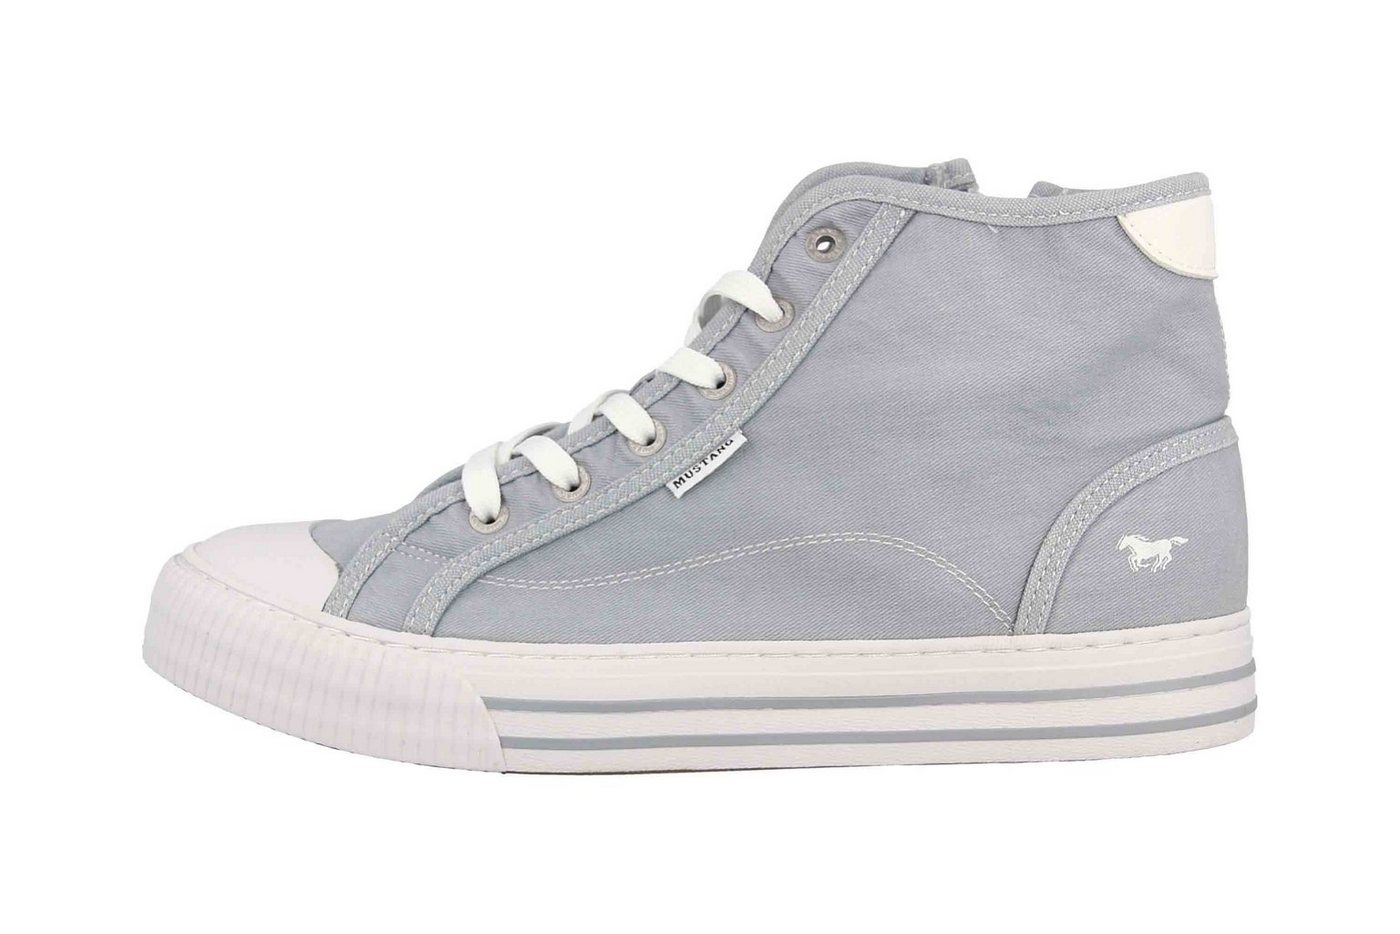 Mustang Shoes 1420-504-896 Sneaker von Mustang Shoes